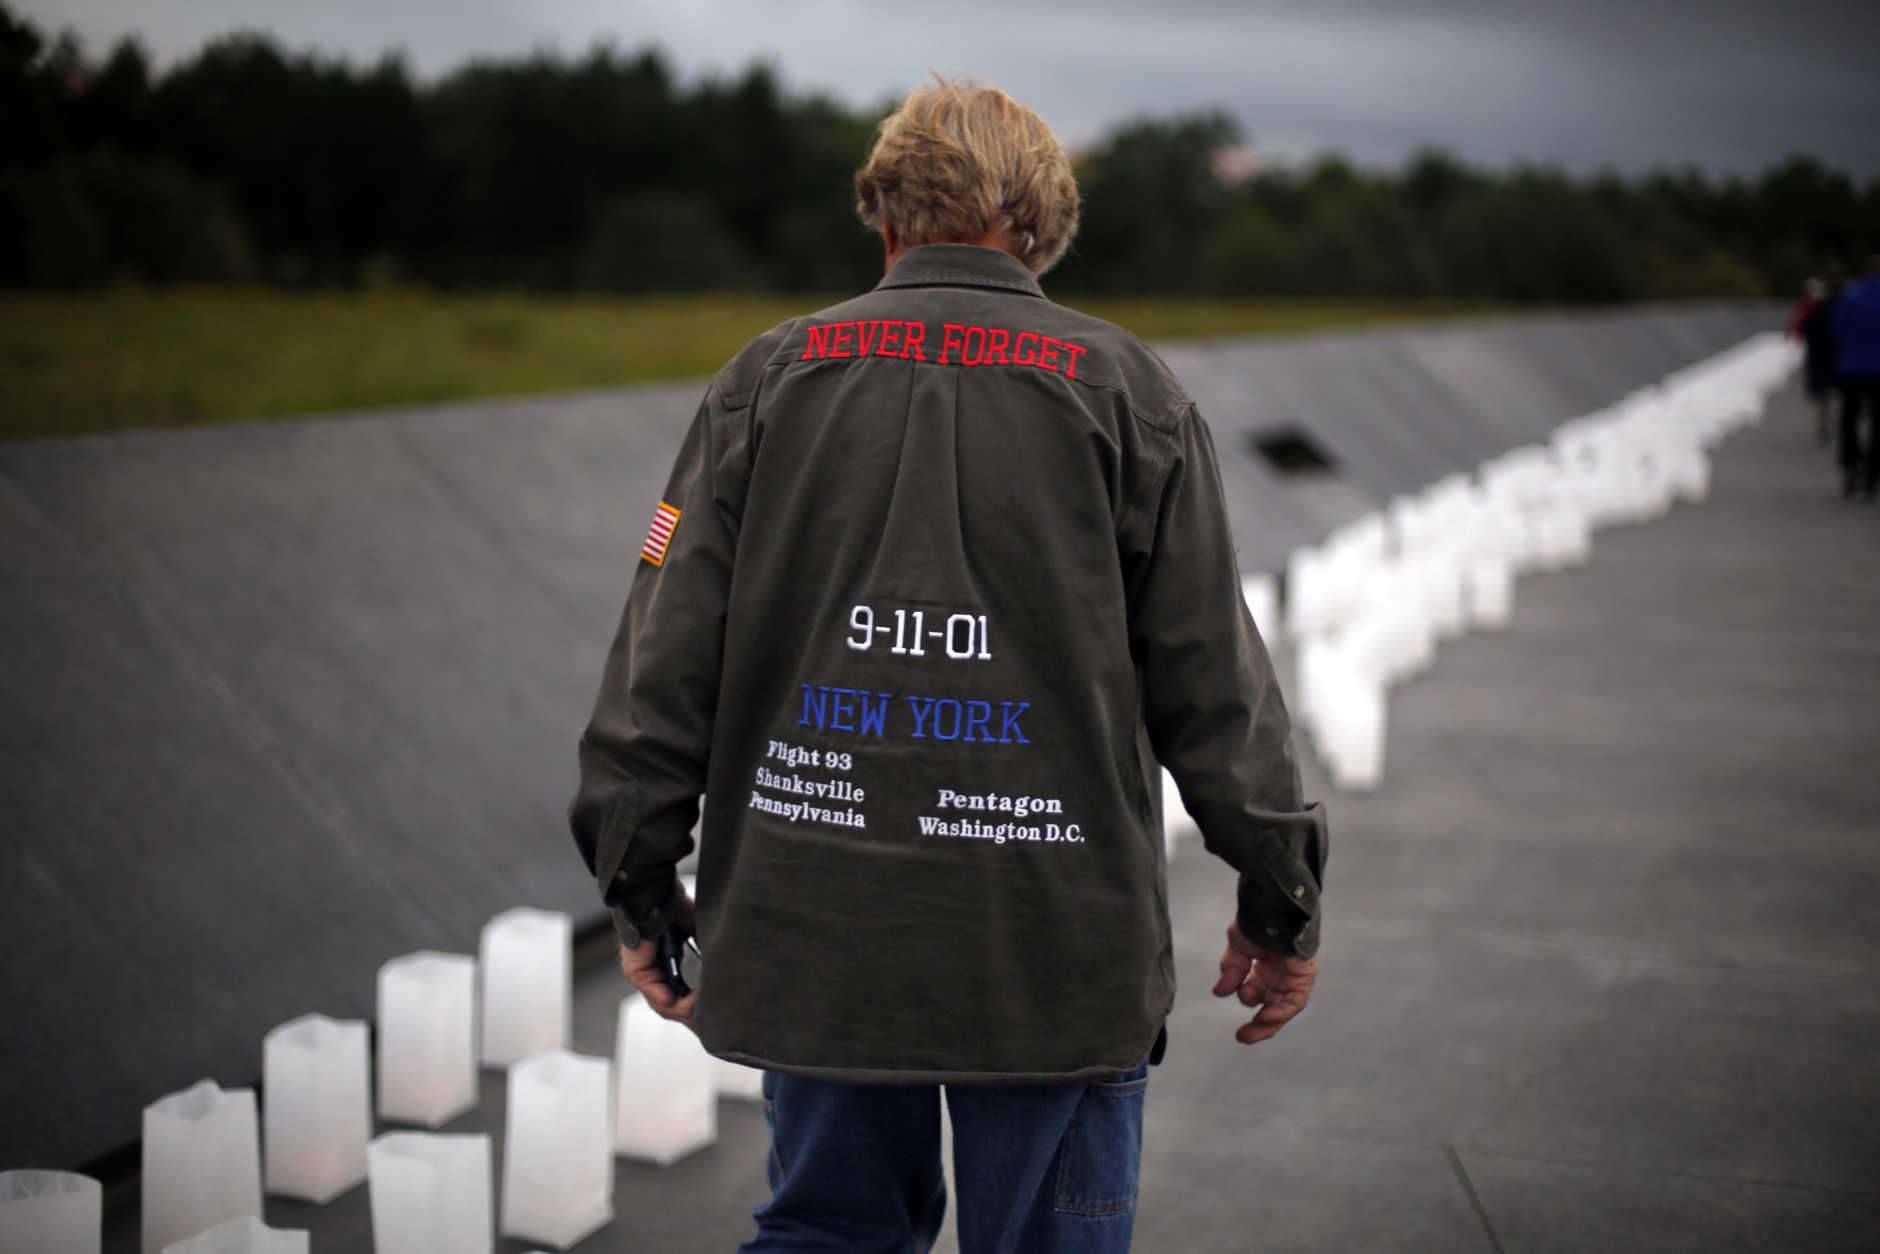 Luminaria line the walkway to the Wall of Names at the Flight 93 National Memorial before a candlelight remembrance in Shanksville, Pa, Thursday, Sept. 10, 2015.  as the nation marks the 14th anniversary of the Sept. 11 attacks. (AP Photo/Gene J. Puskar)